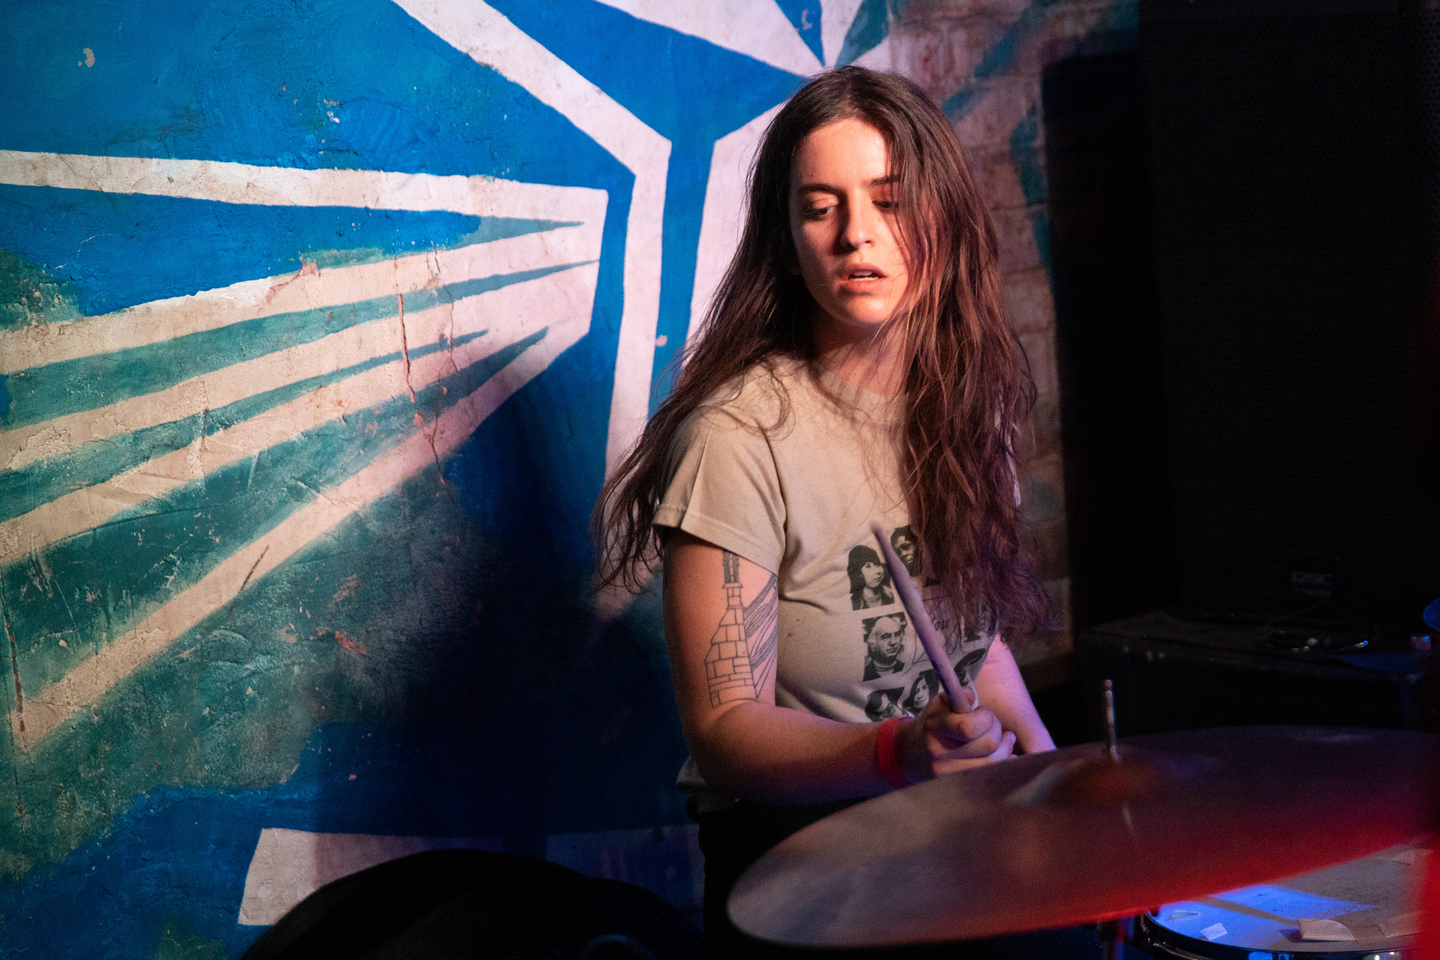 Hash Redactor at Beerland, presented by Goner Records – Photo by Cris DeWitt